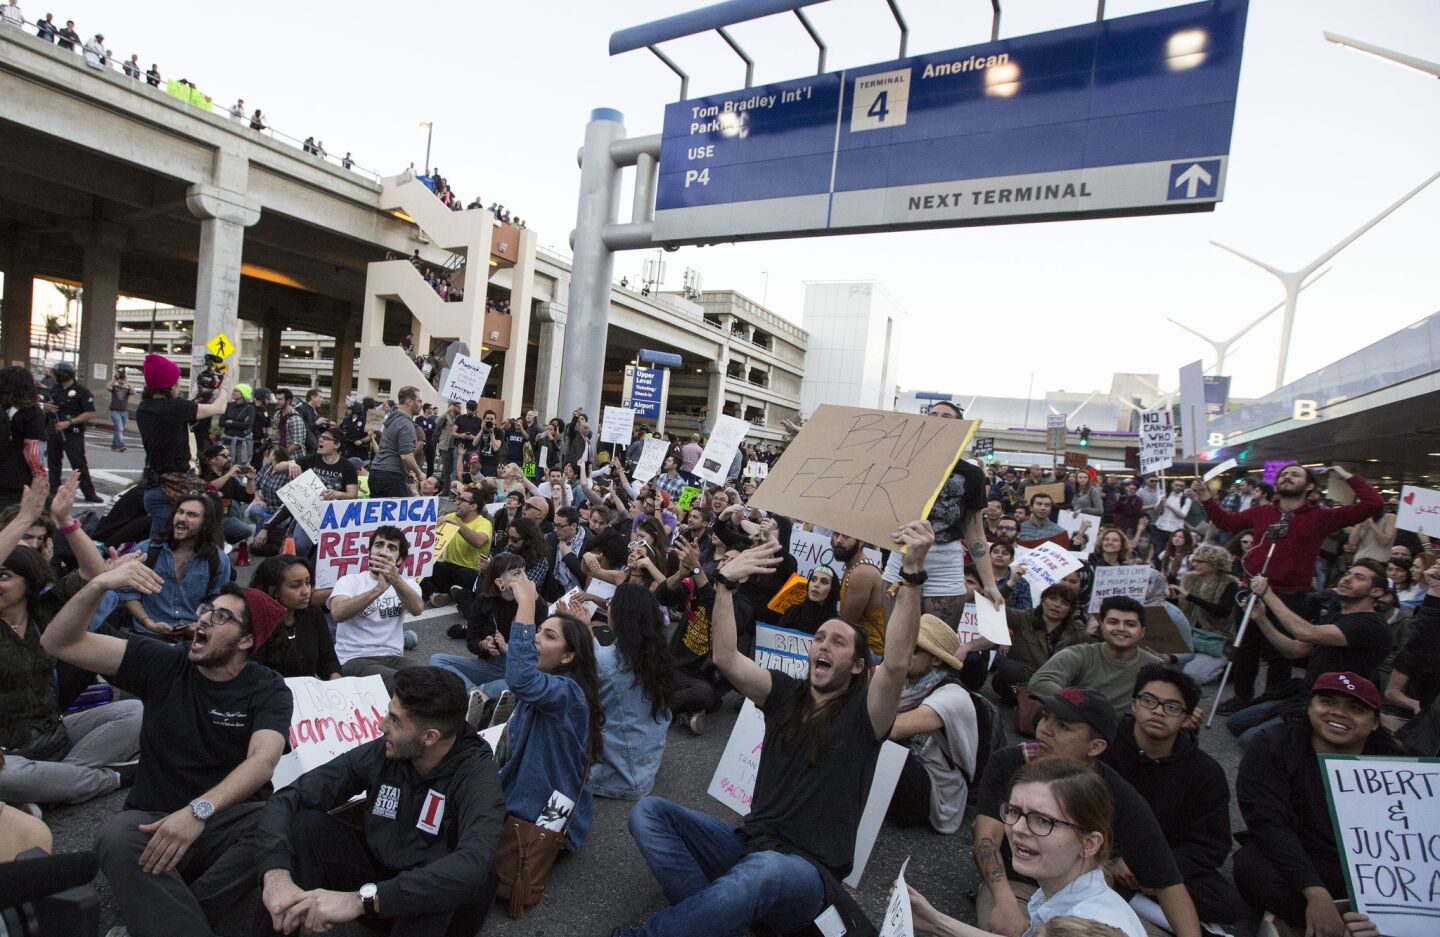 Hundreds block traffic on the arrival level of the Tom Bradley International Terminal to protest President Trump's immigration order.